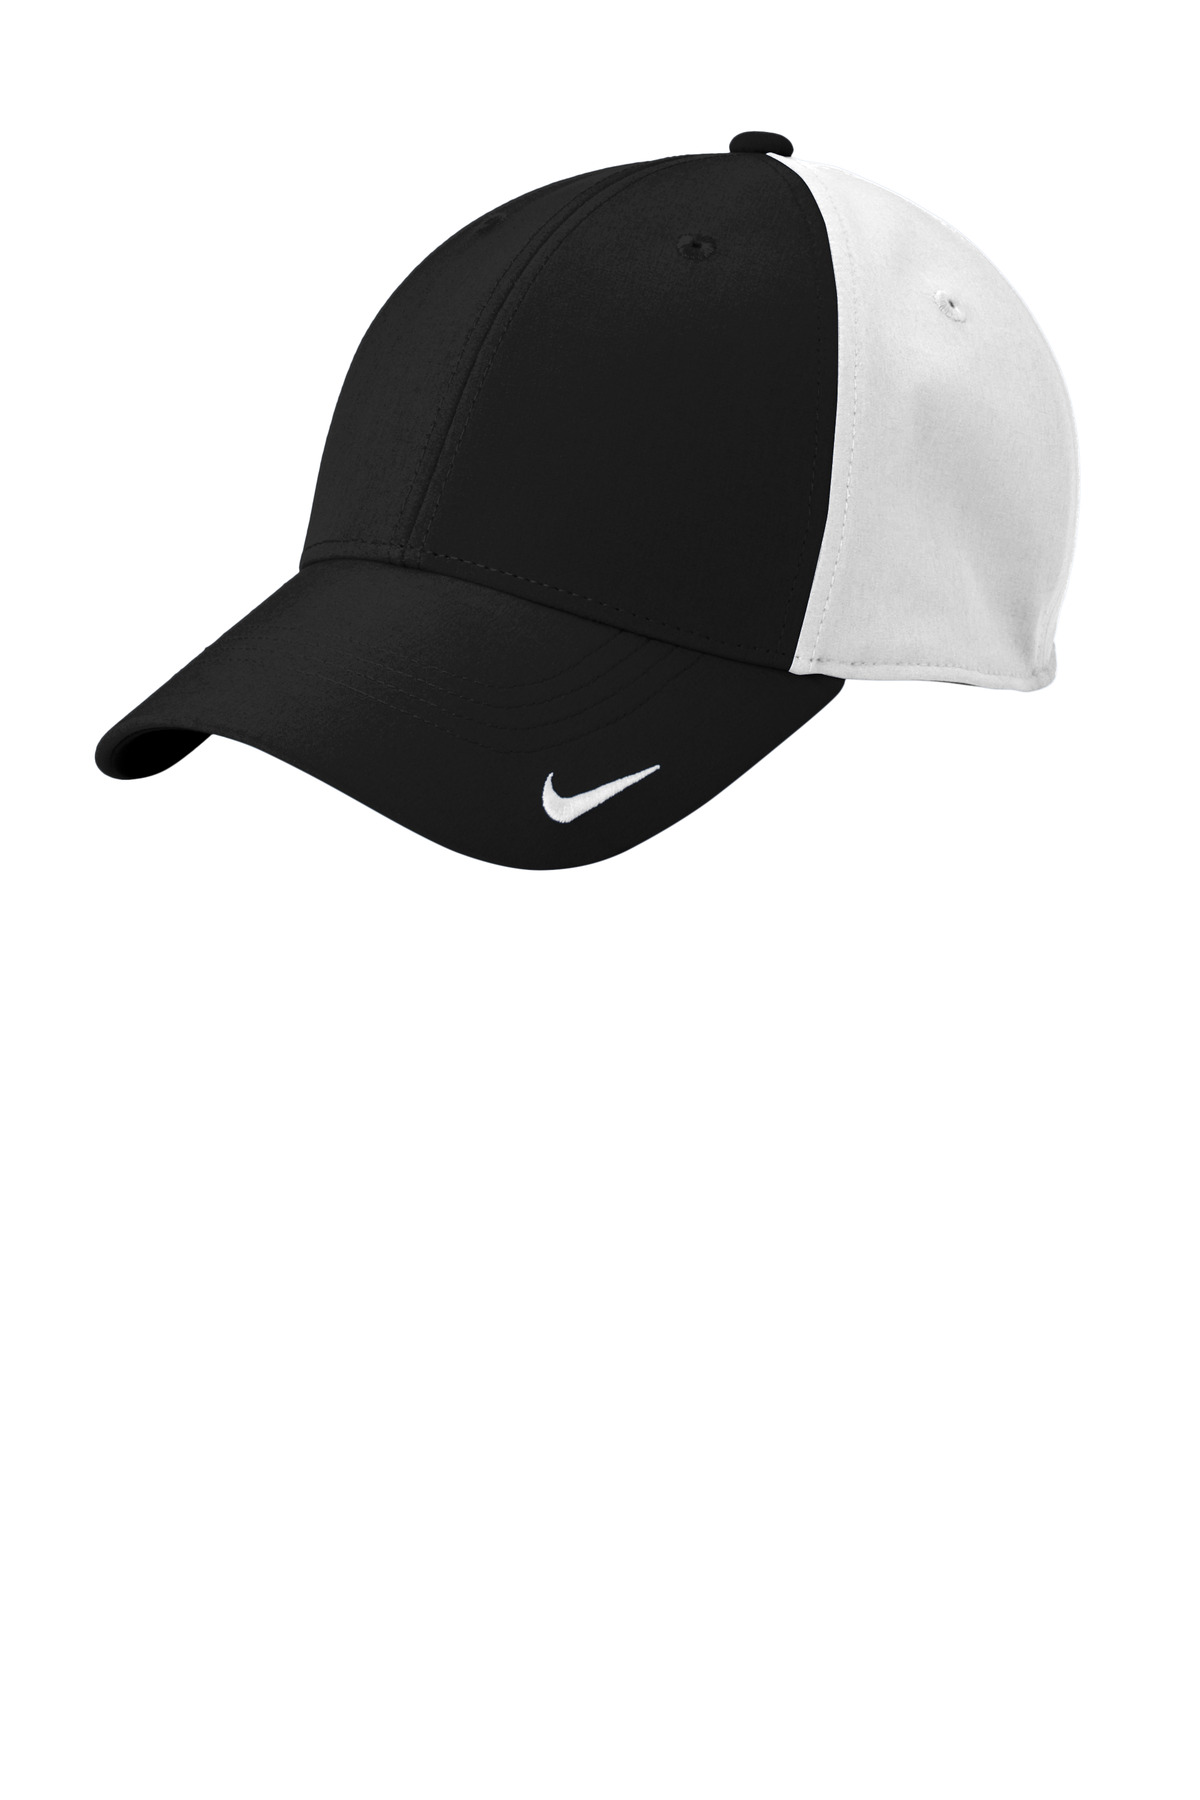 **NEW** NKFB6447 - Dri-FIT Legacy Cap.   Embroidered Logo on Front Center using White Threads to match the Nike Swoosh.